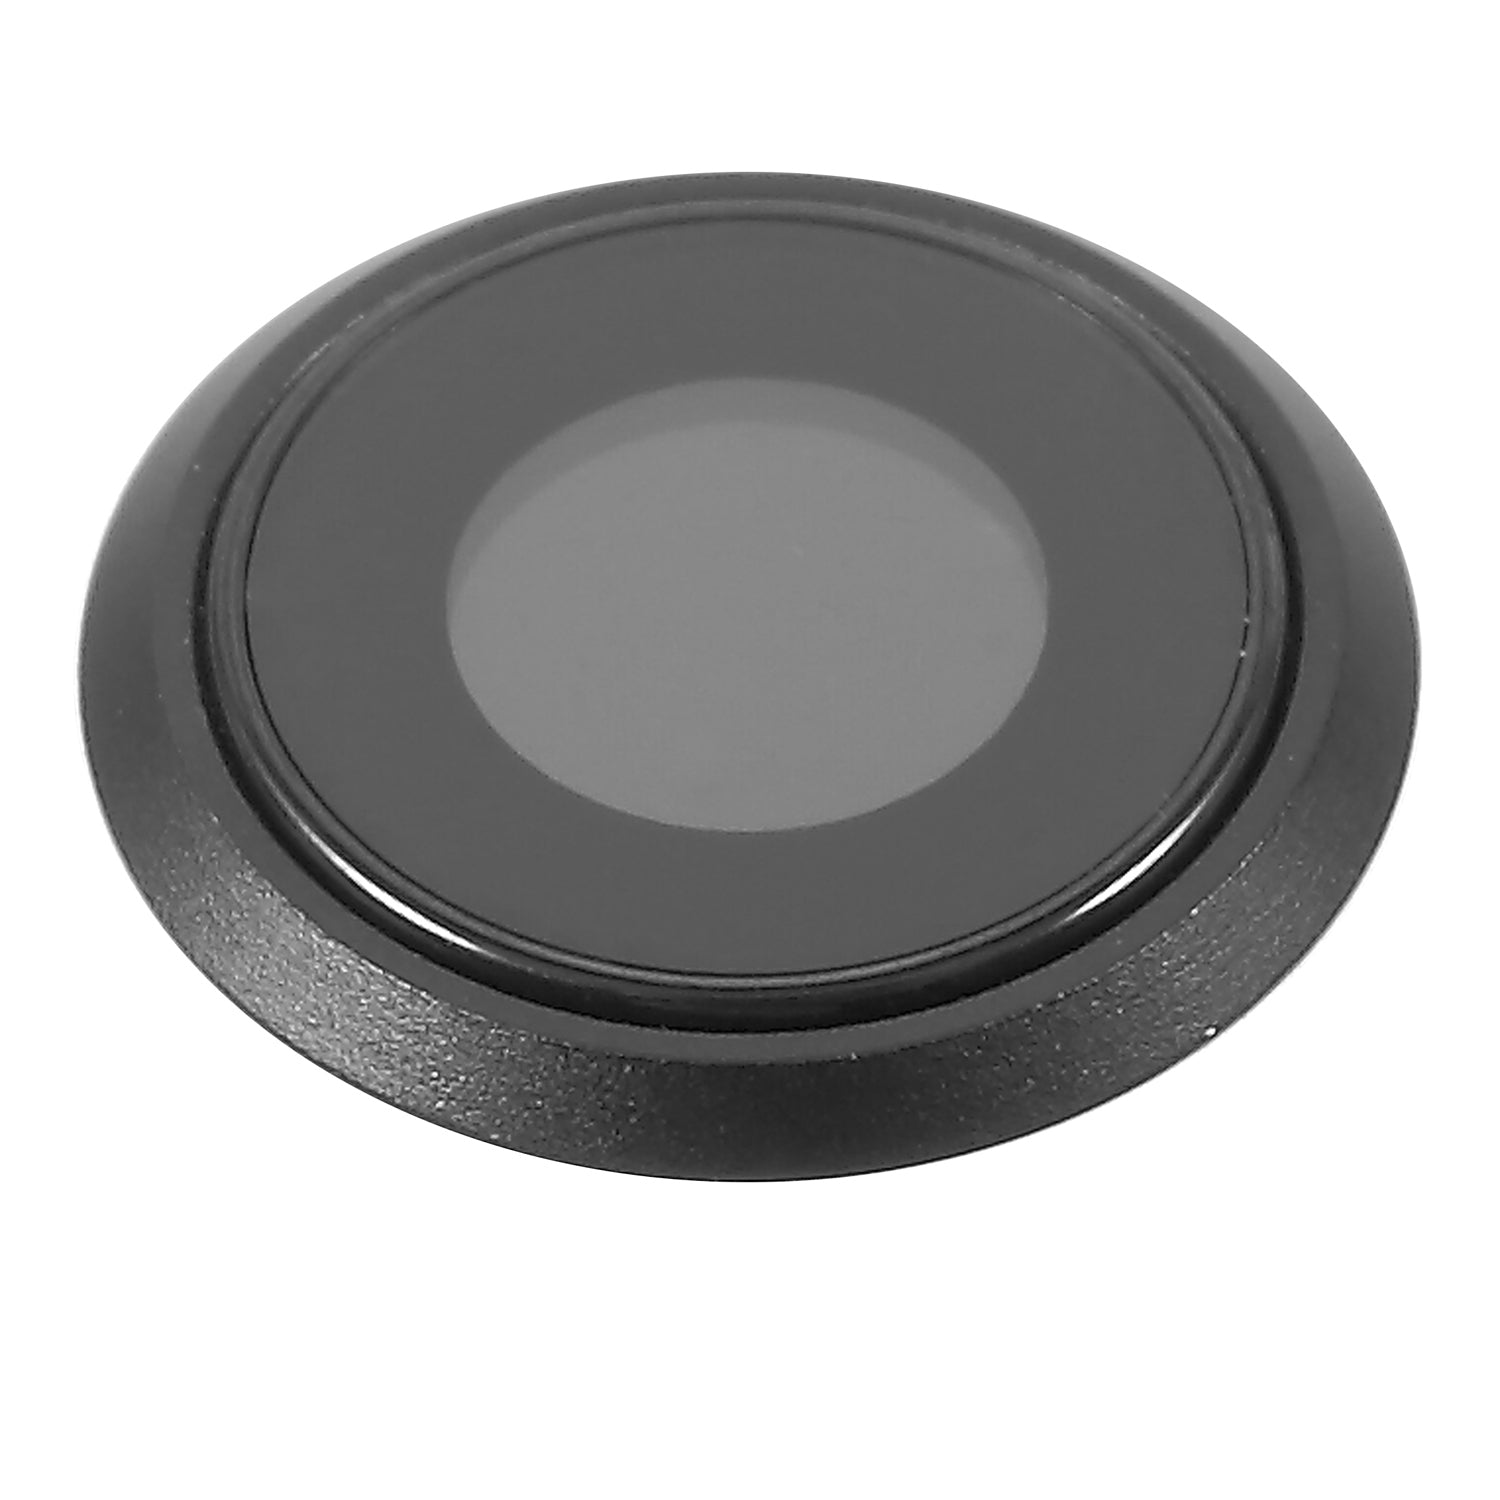 Back Camera Lens Ring Cover with Glass Lens for iPhone 8 4.7 inch - Black